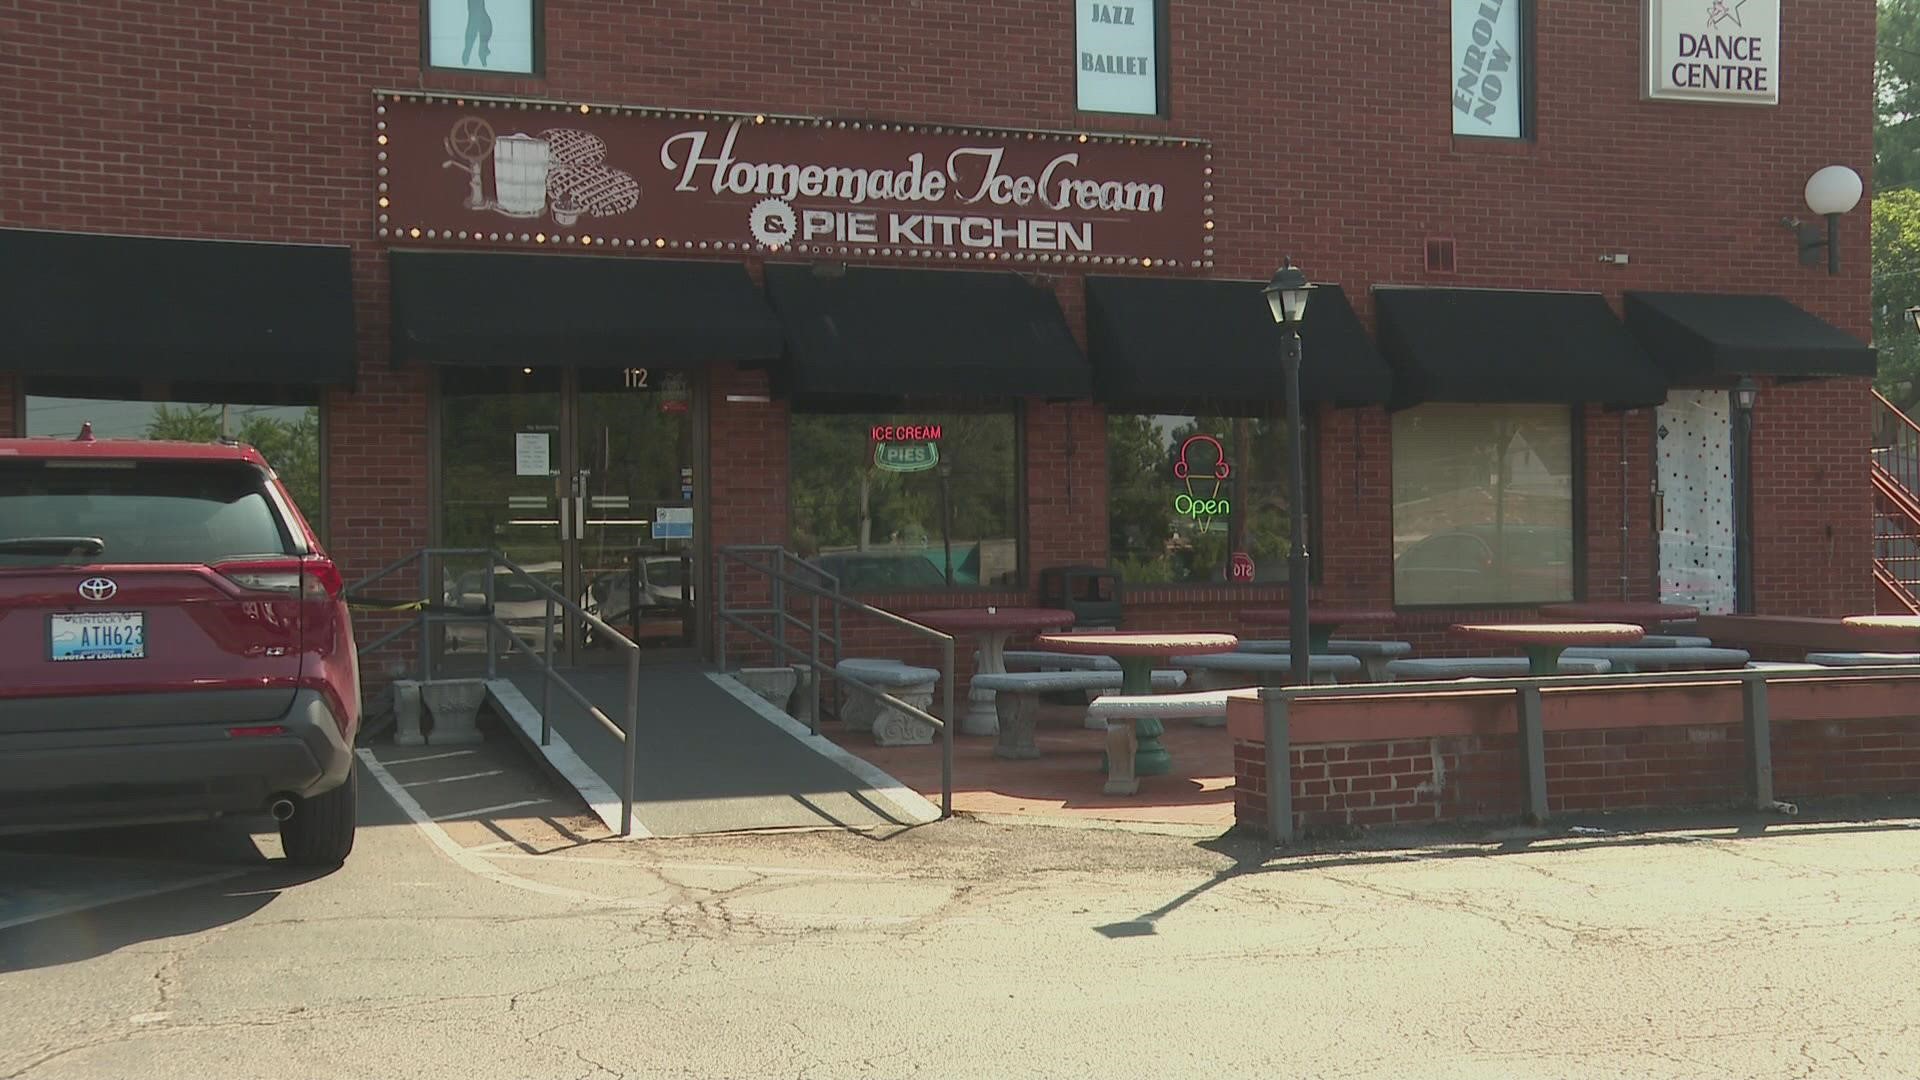 Homemade Ice Cream & Pie Kitchen celebrate 40 year next week. They first opened their doors in The Highlands neighborhood Aug. 2, 1982.